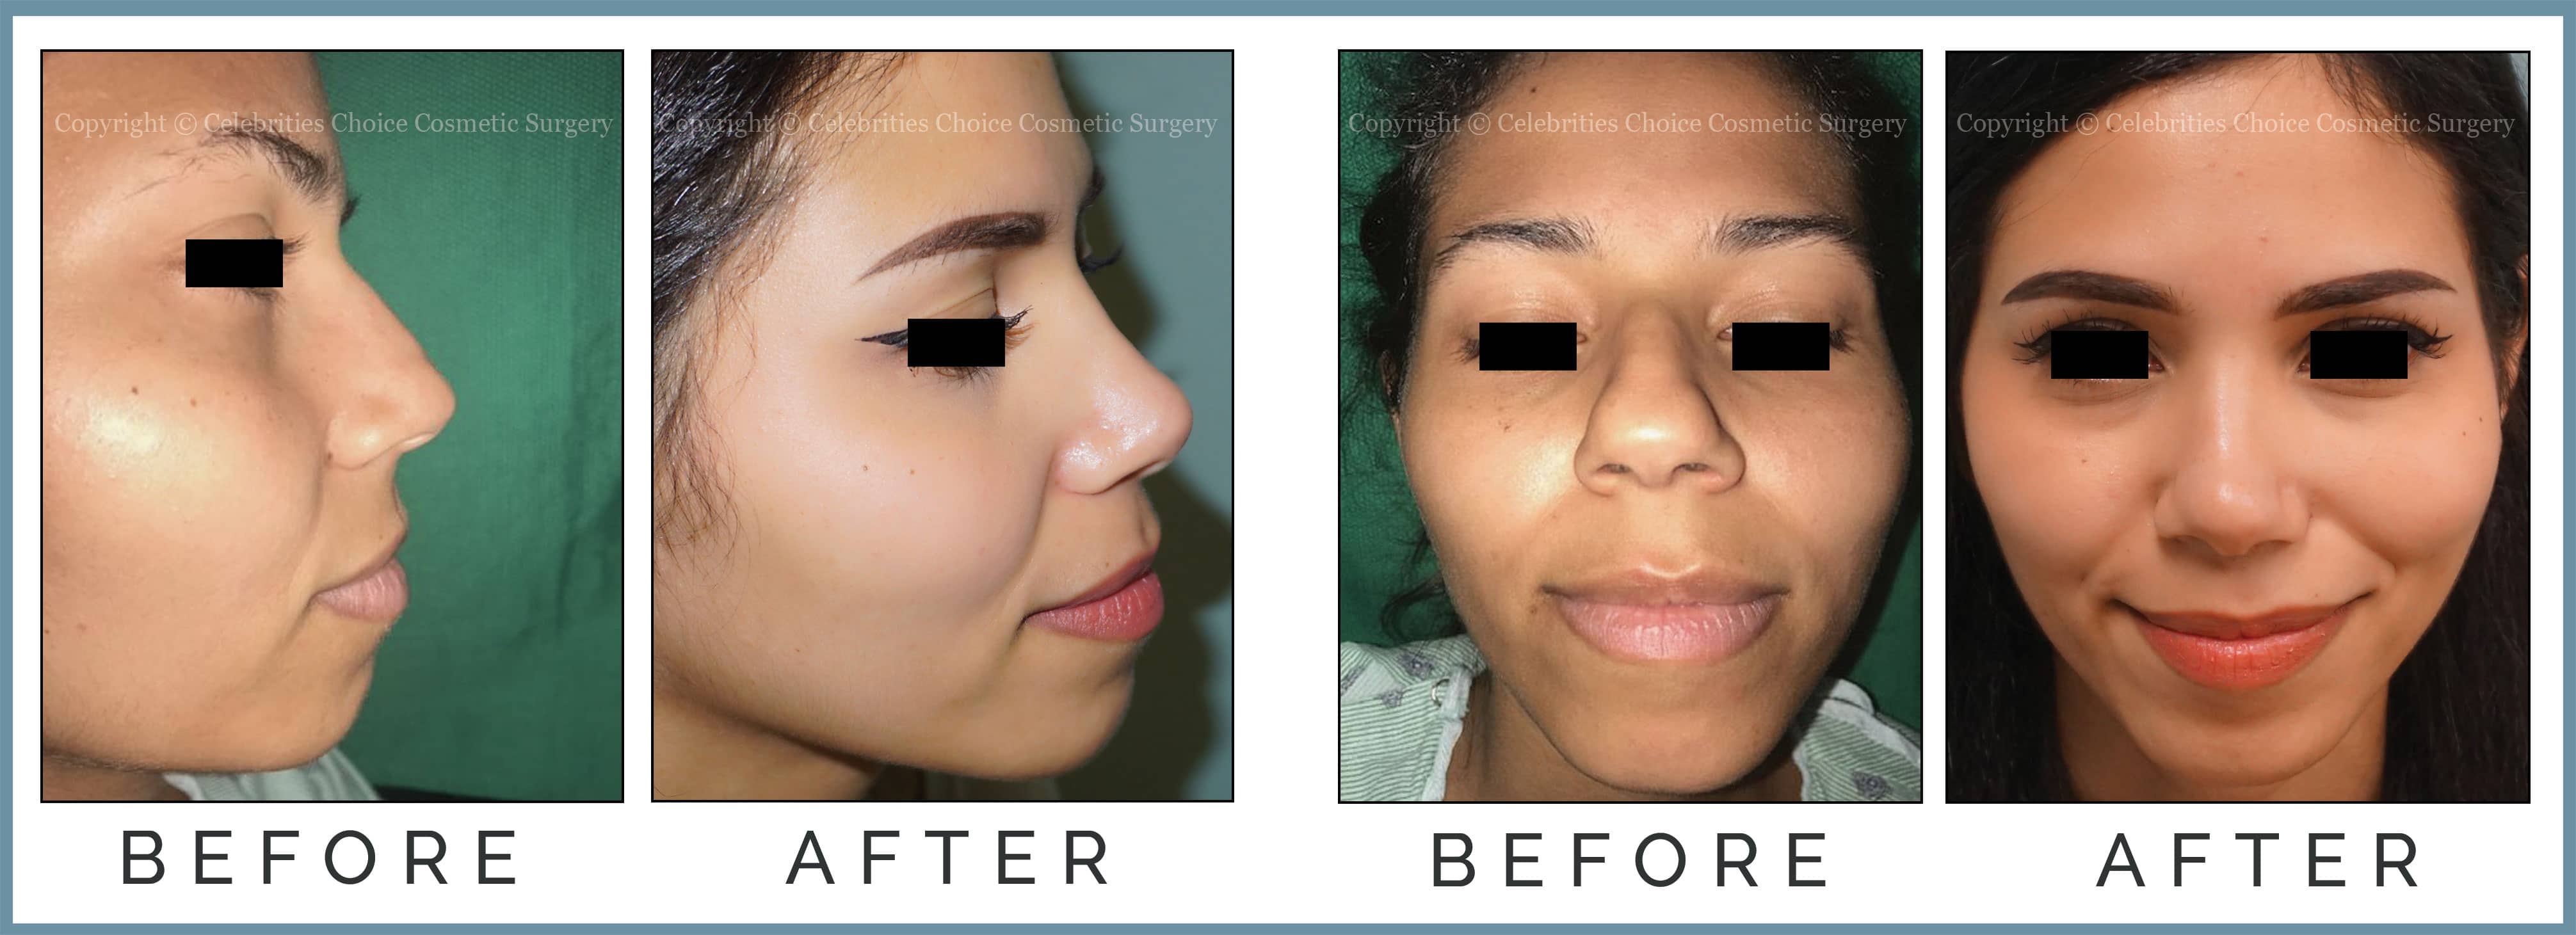 Reduction Rhinoplasty performed through a closed technique